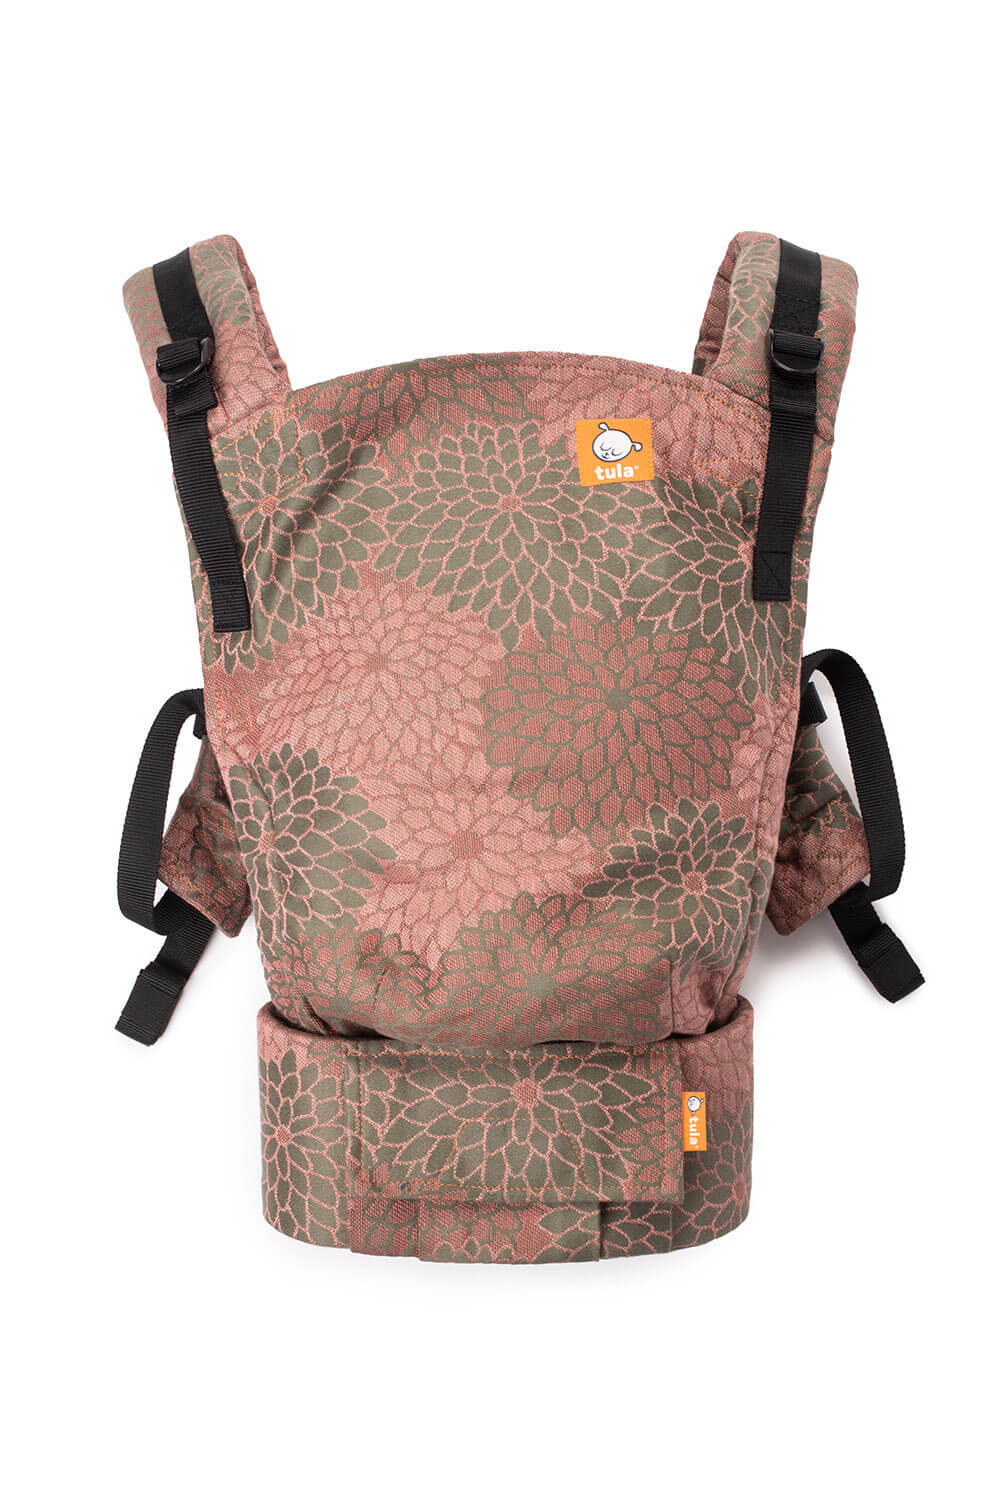 Kiku Chelsey - Signature Woven Free-to-Grow Baby Carrier